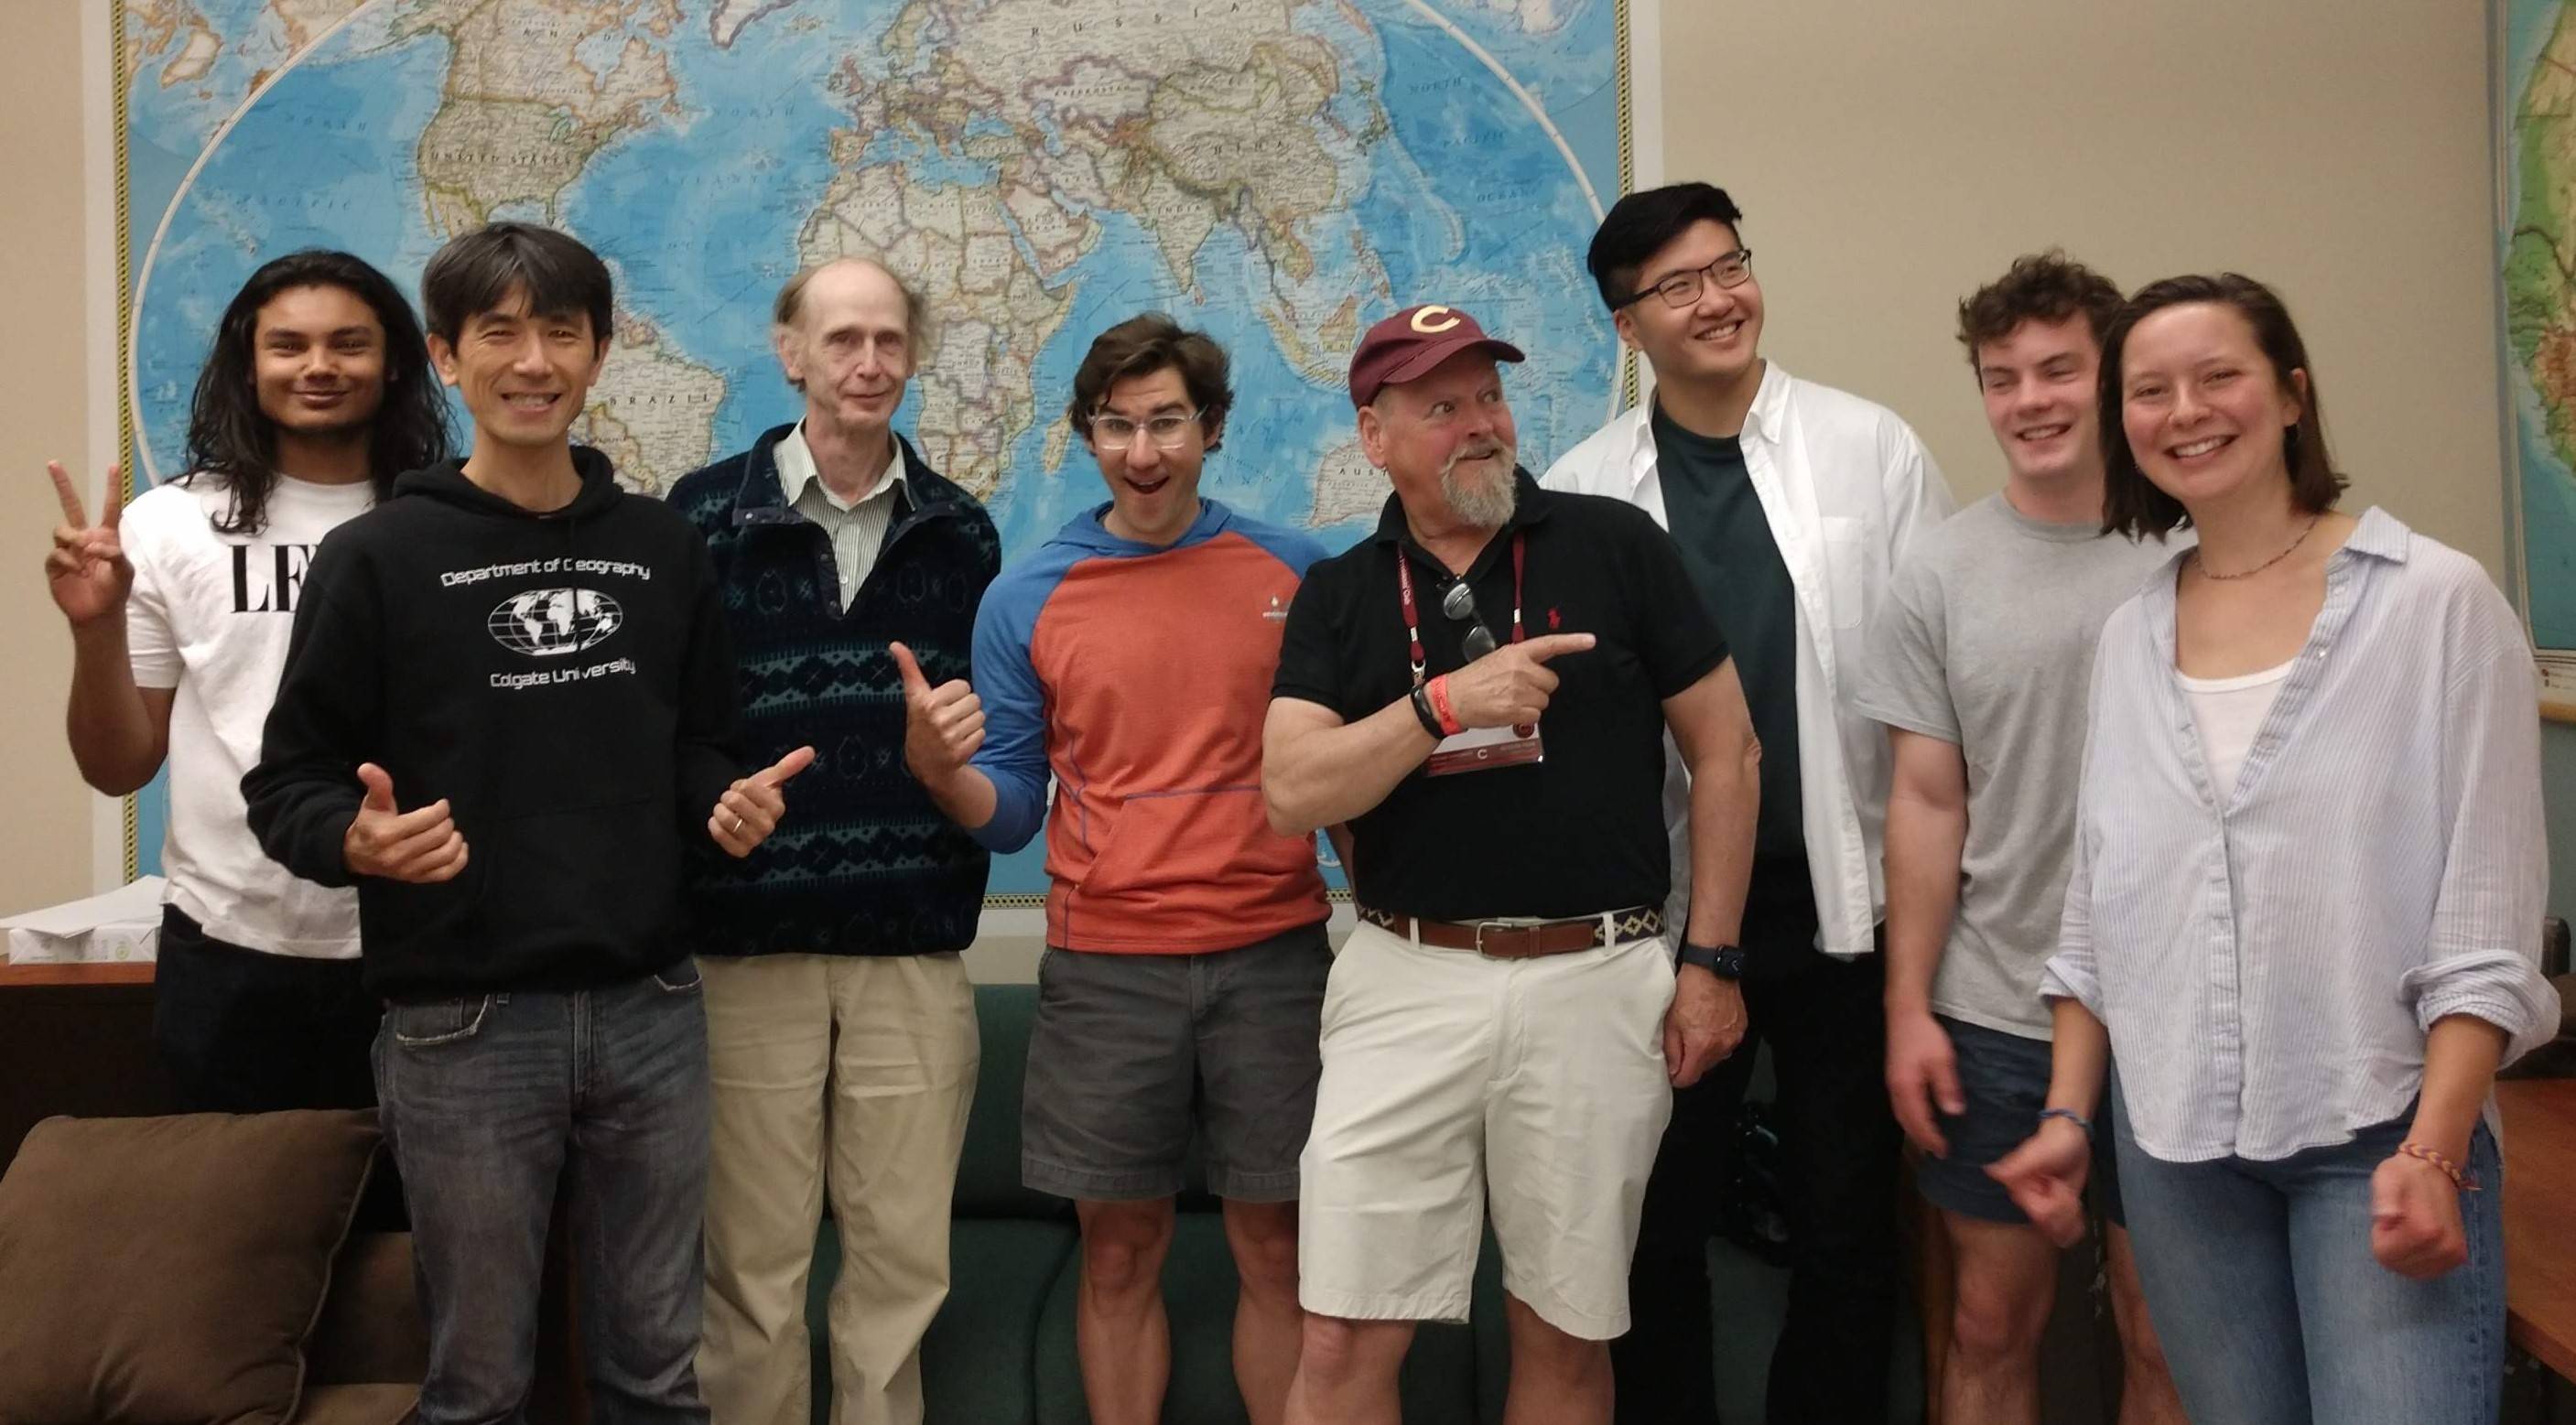 Dean Wuse '76 has fun with Department of Geography summer research students.